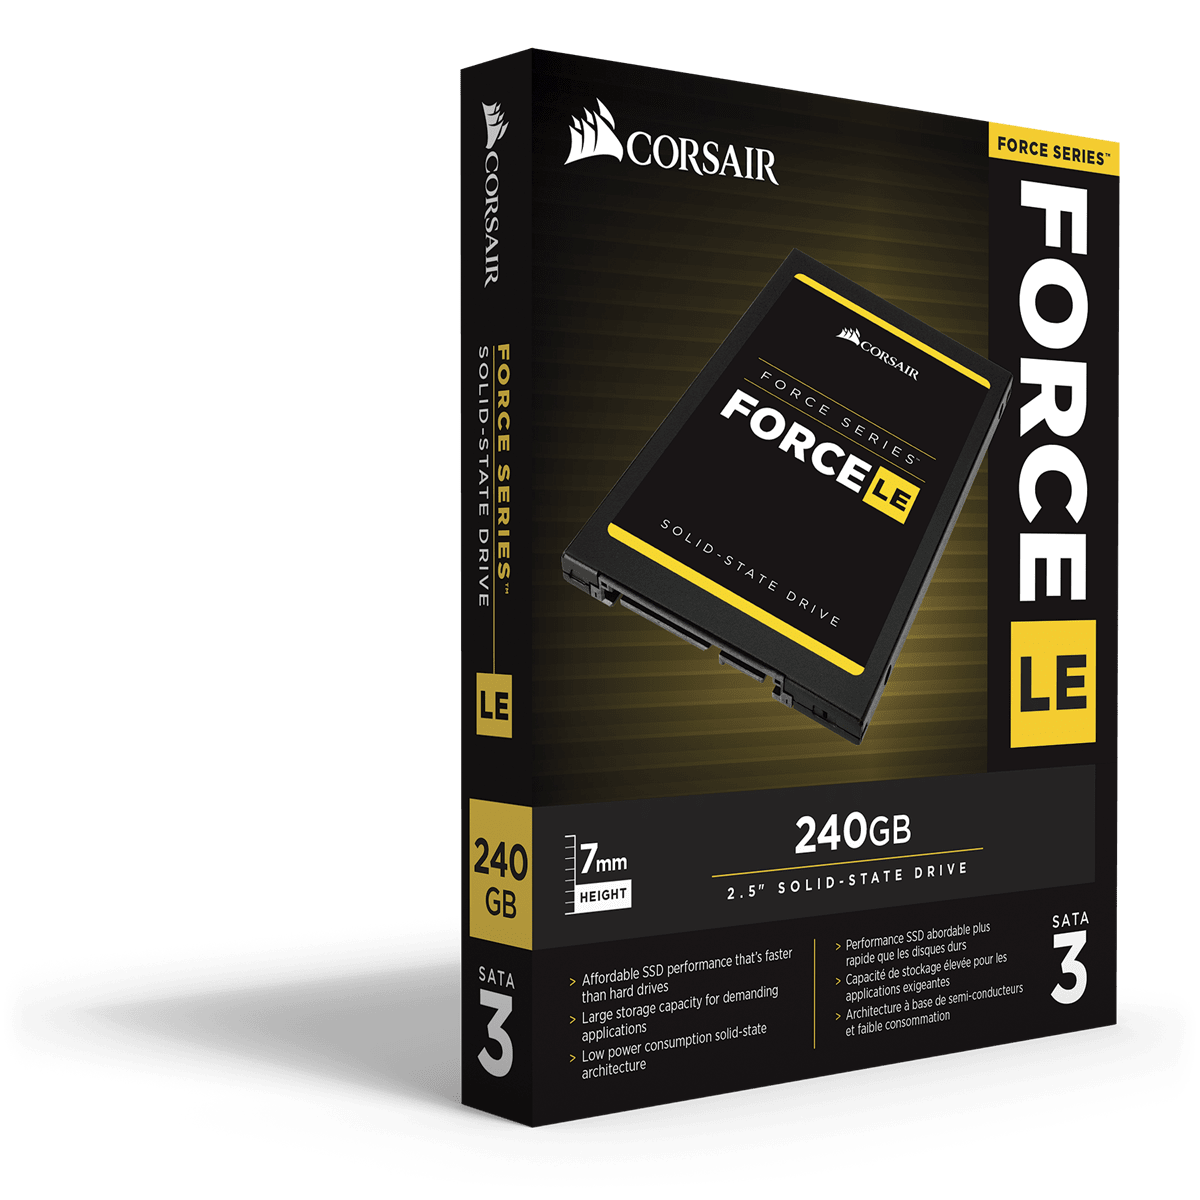 Force Series™ LE 240GB 3 SSD